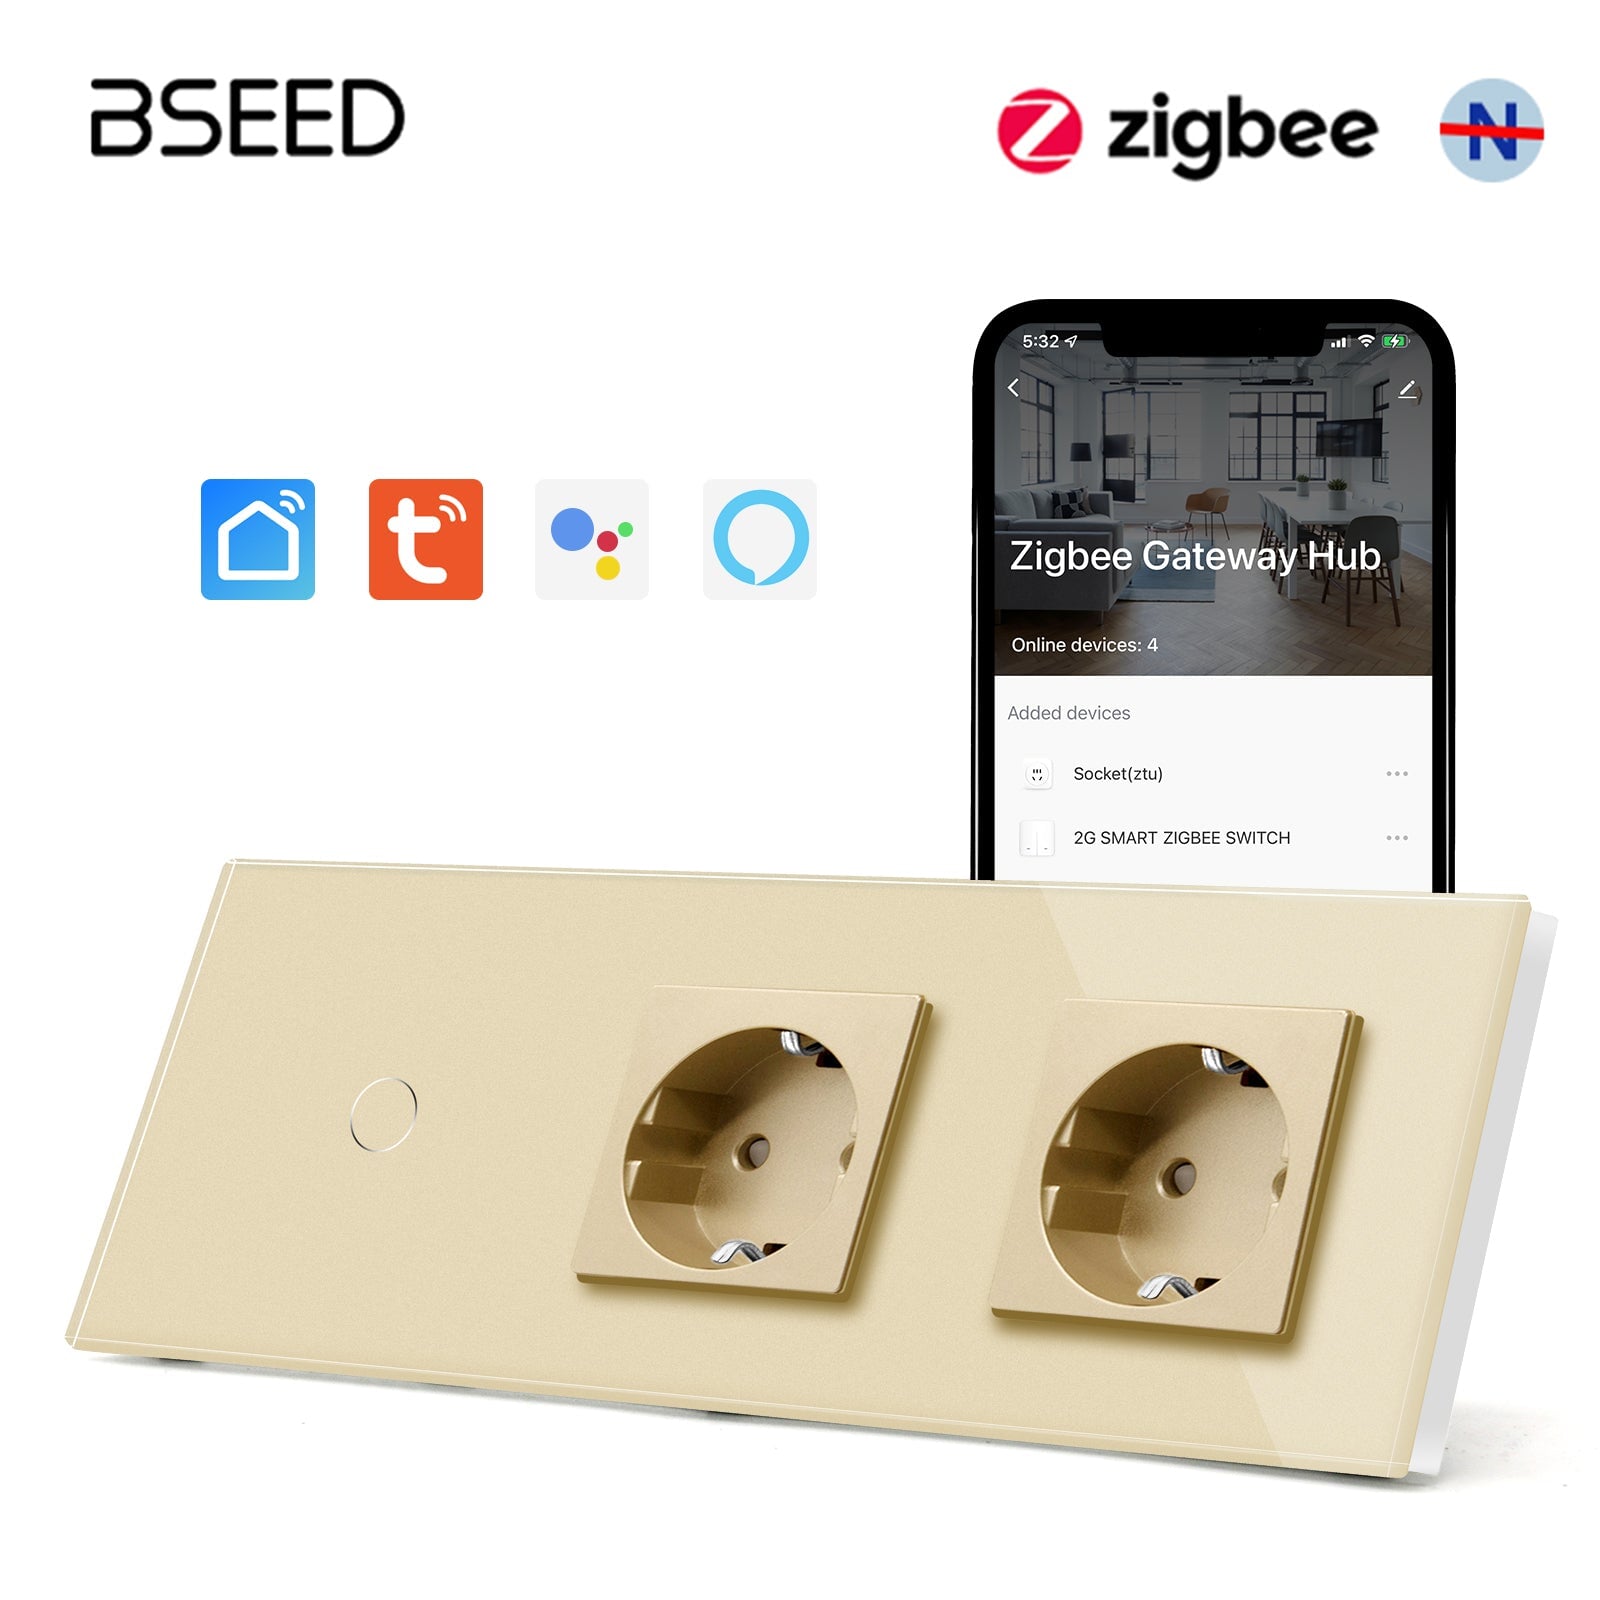 Bseed Zigbee Touch 1/2/3 Gang Light Switches Single Live Line Multi Control With Double EU Standard Not Smart Wall Sockets Light Switches Bseedswitch Golden 1Gang 